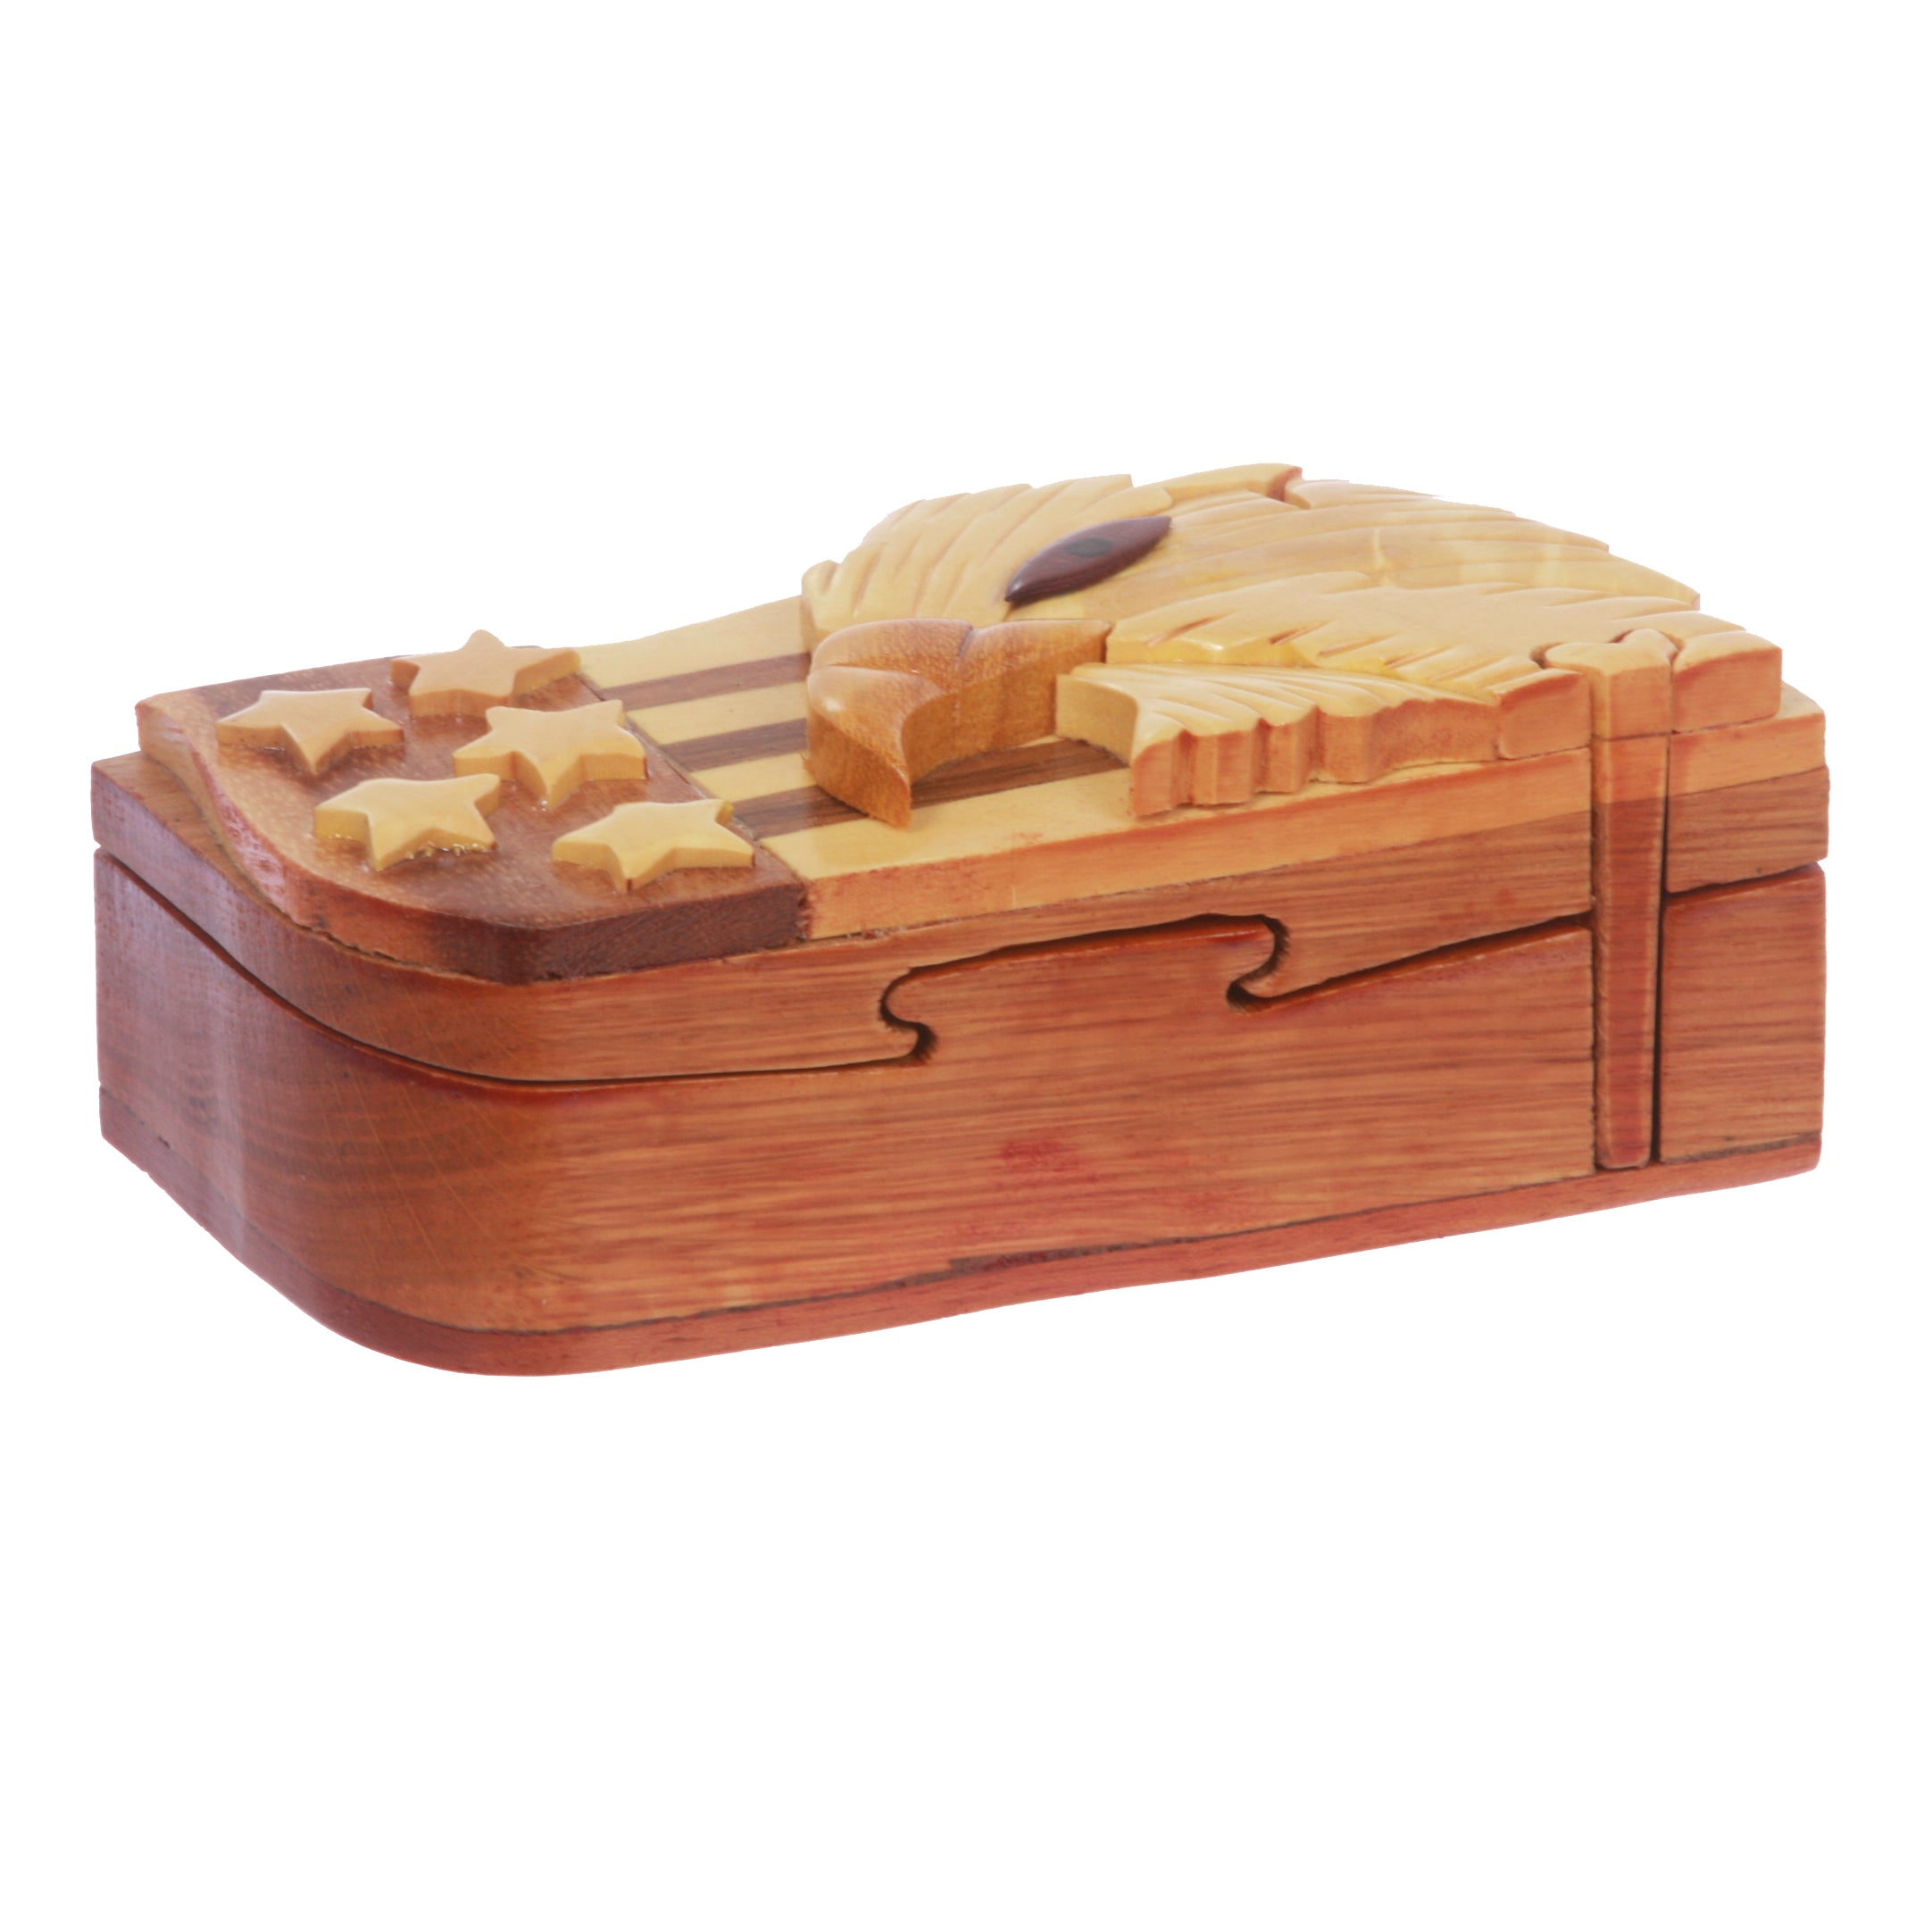 Handcrafted Wooden Animal Shape Secret Jewelry Puzzle Box -  Eagle